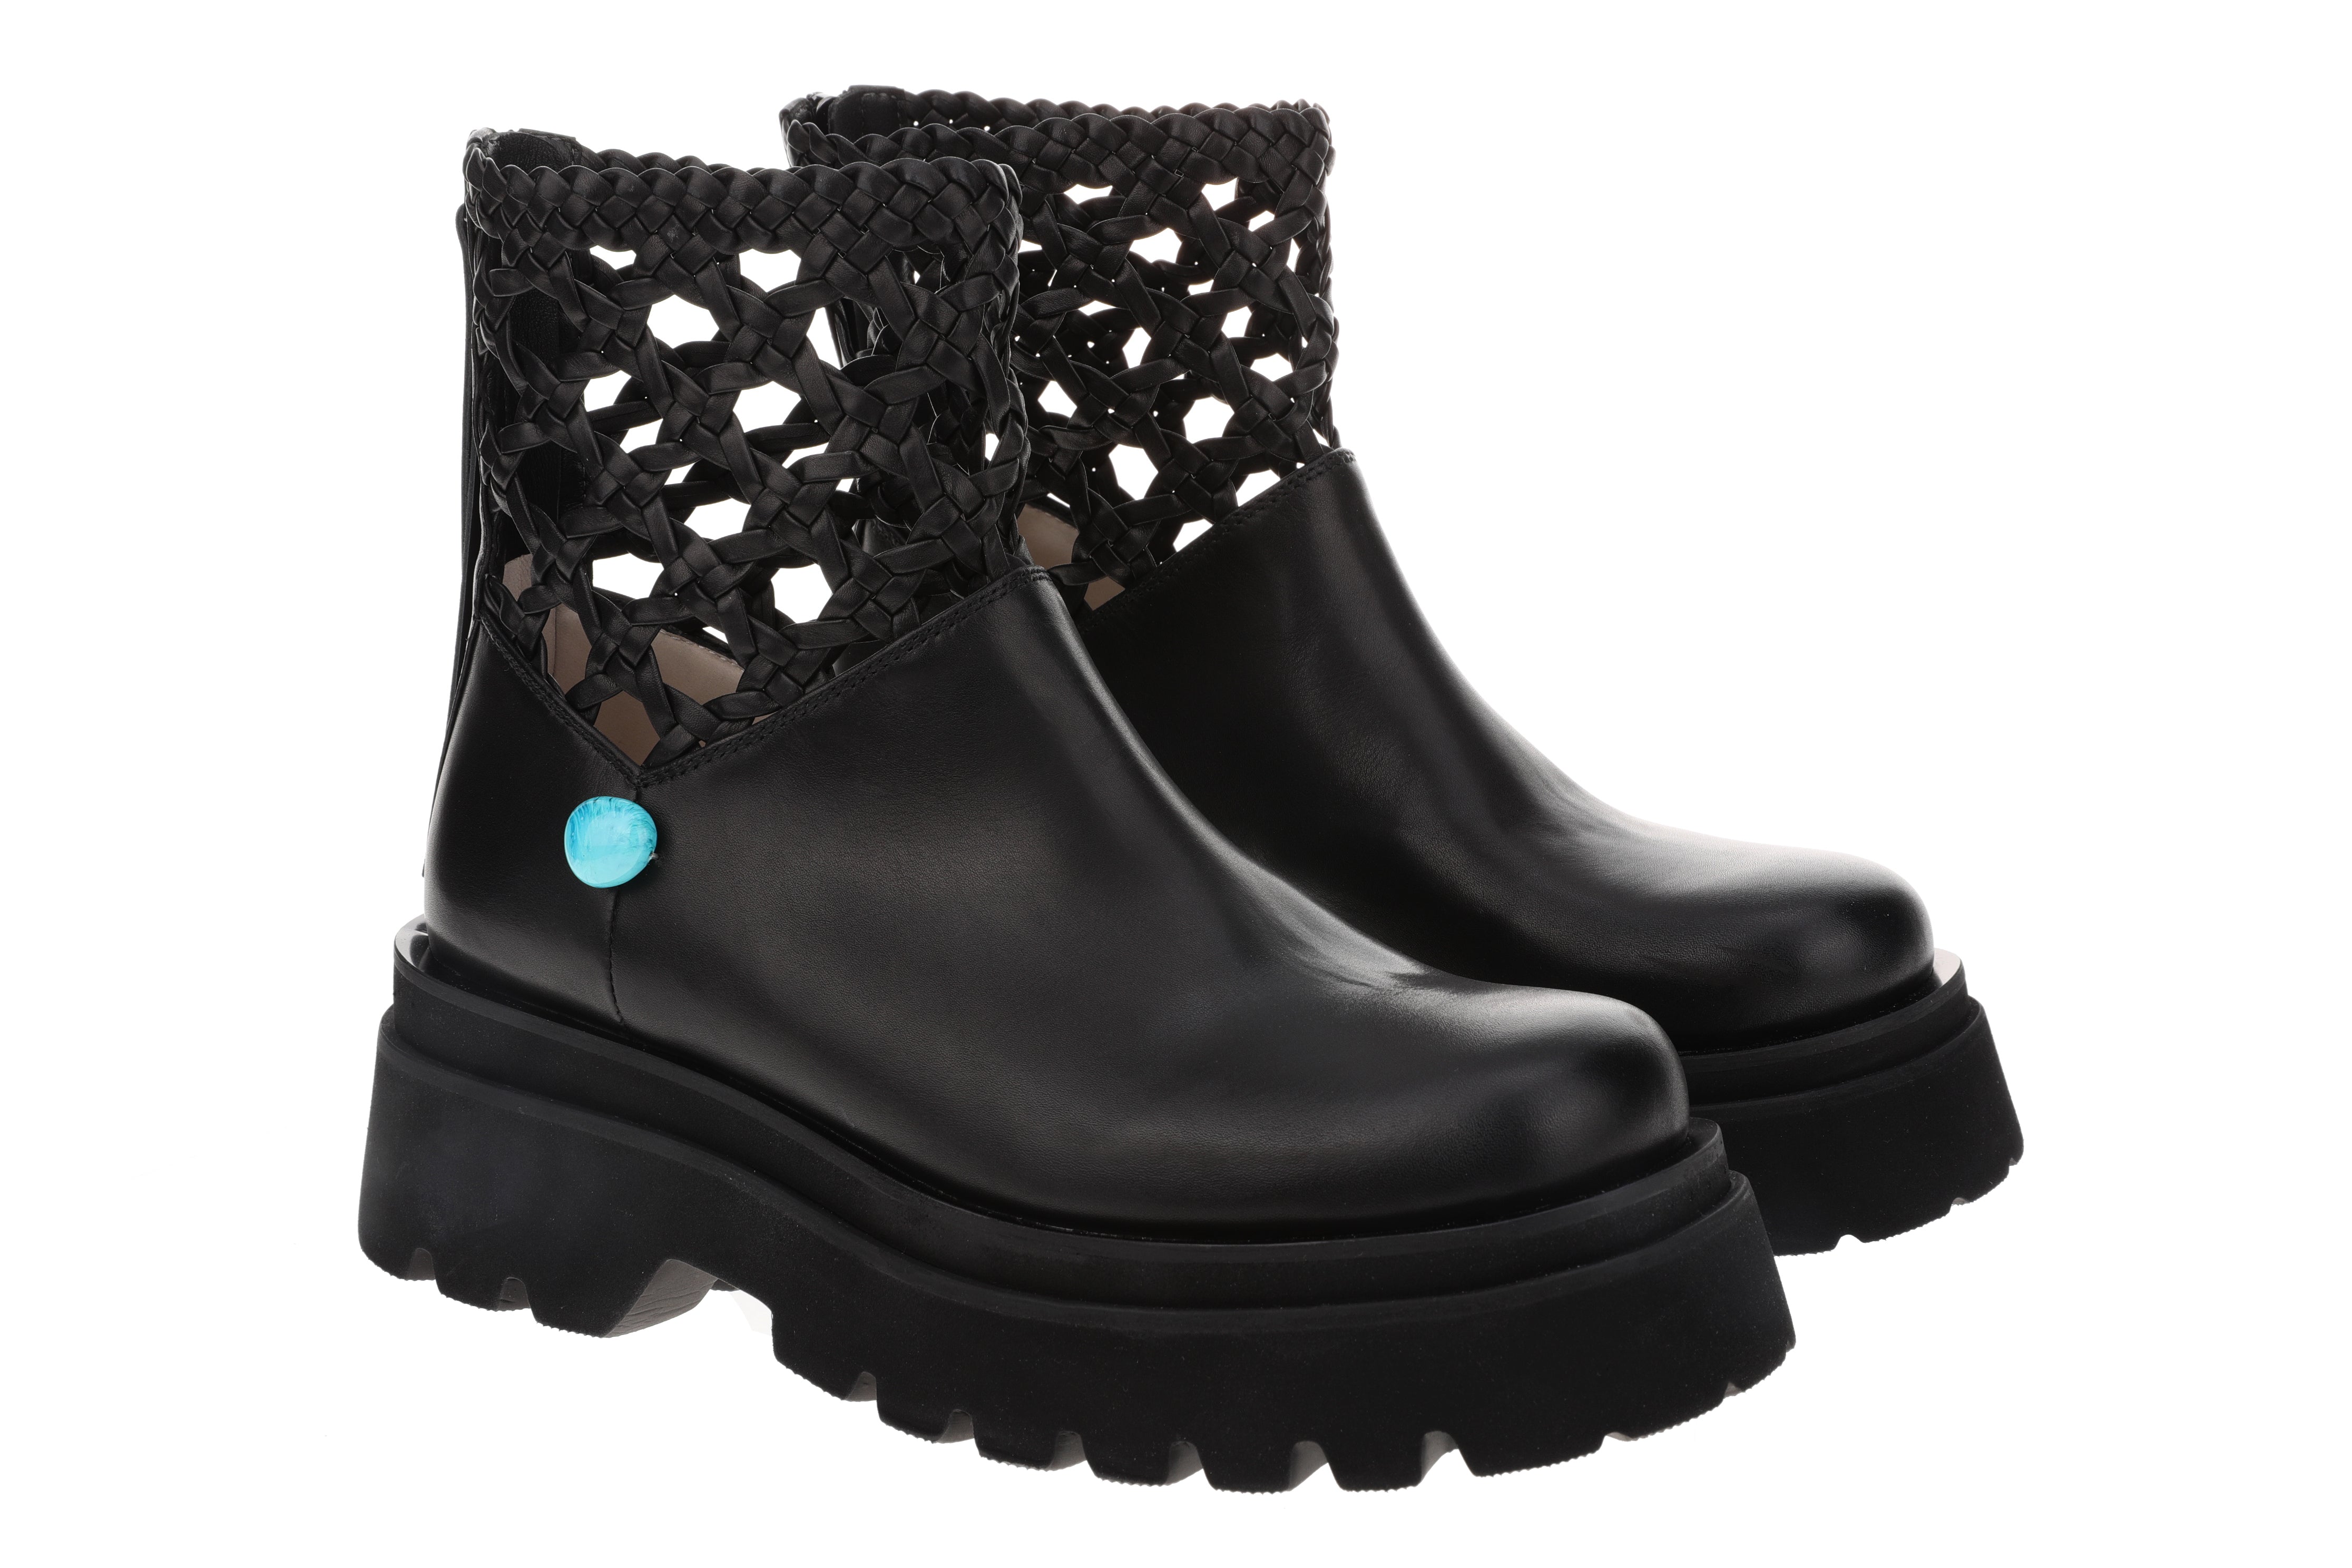 Women's cowhide turquoise woven boot